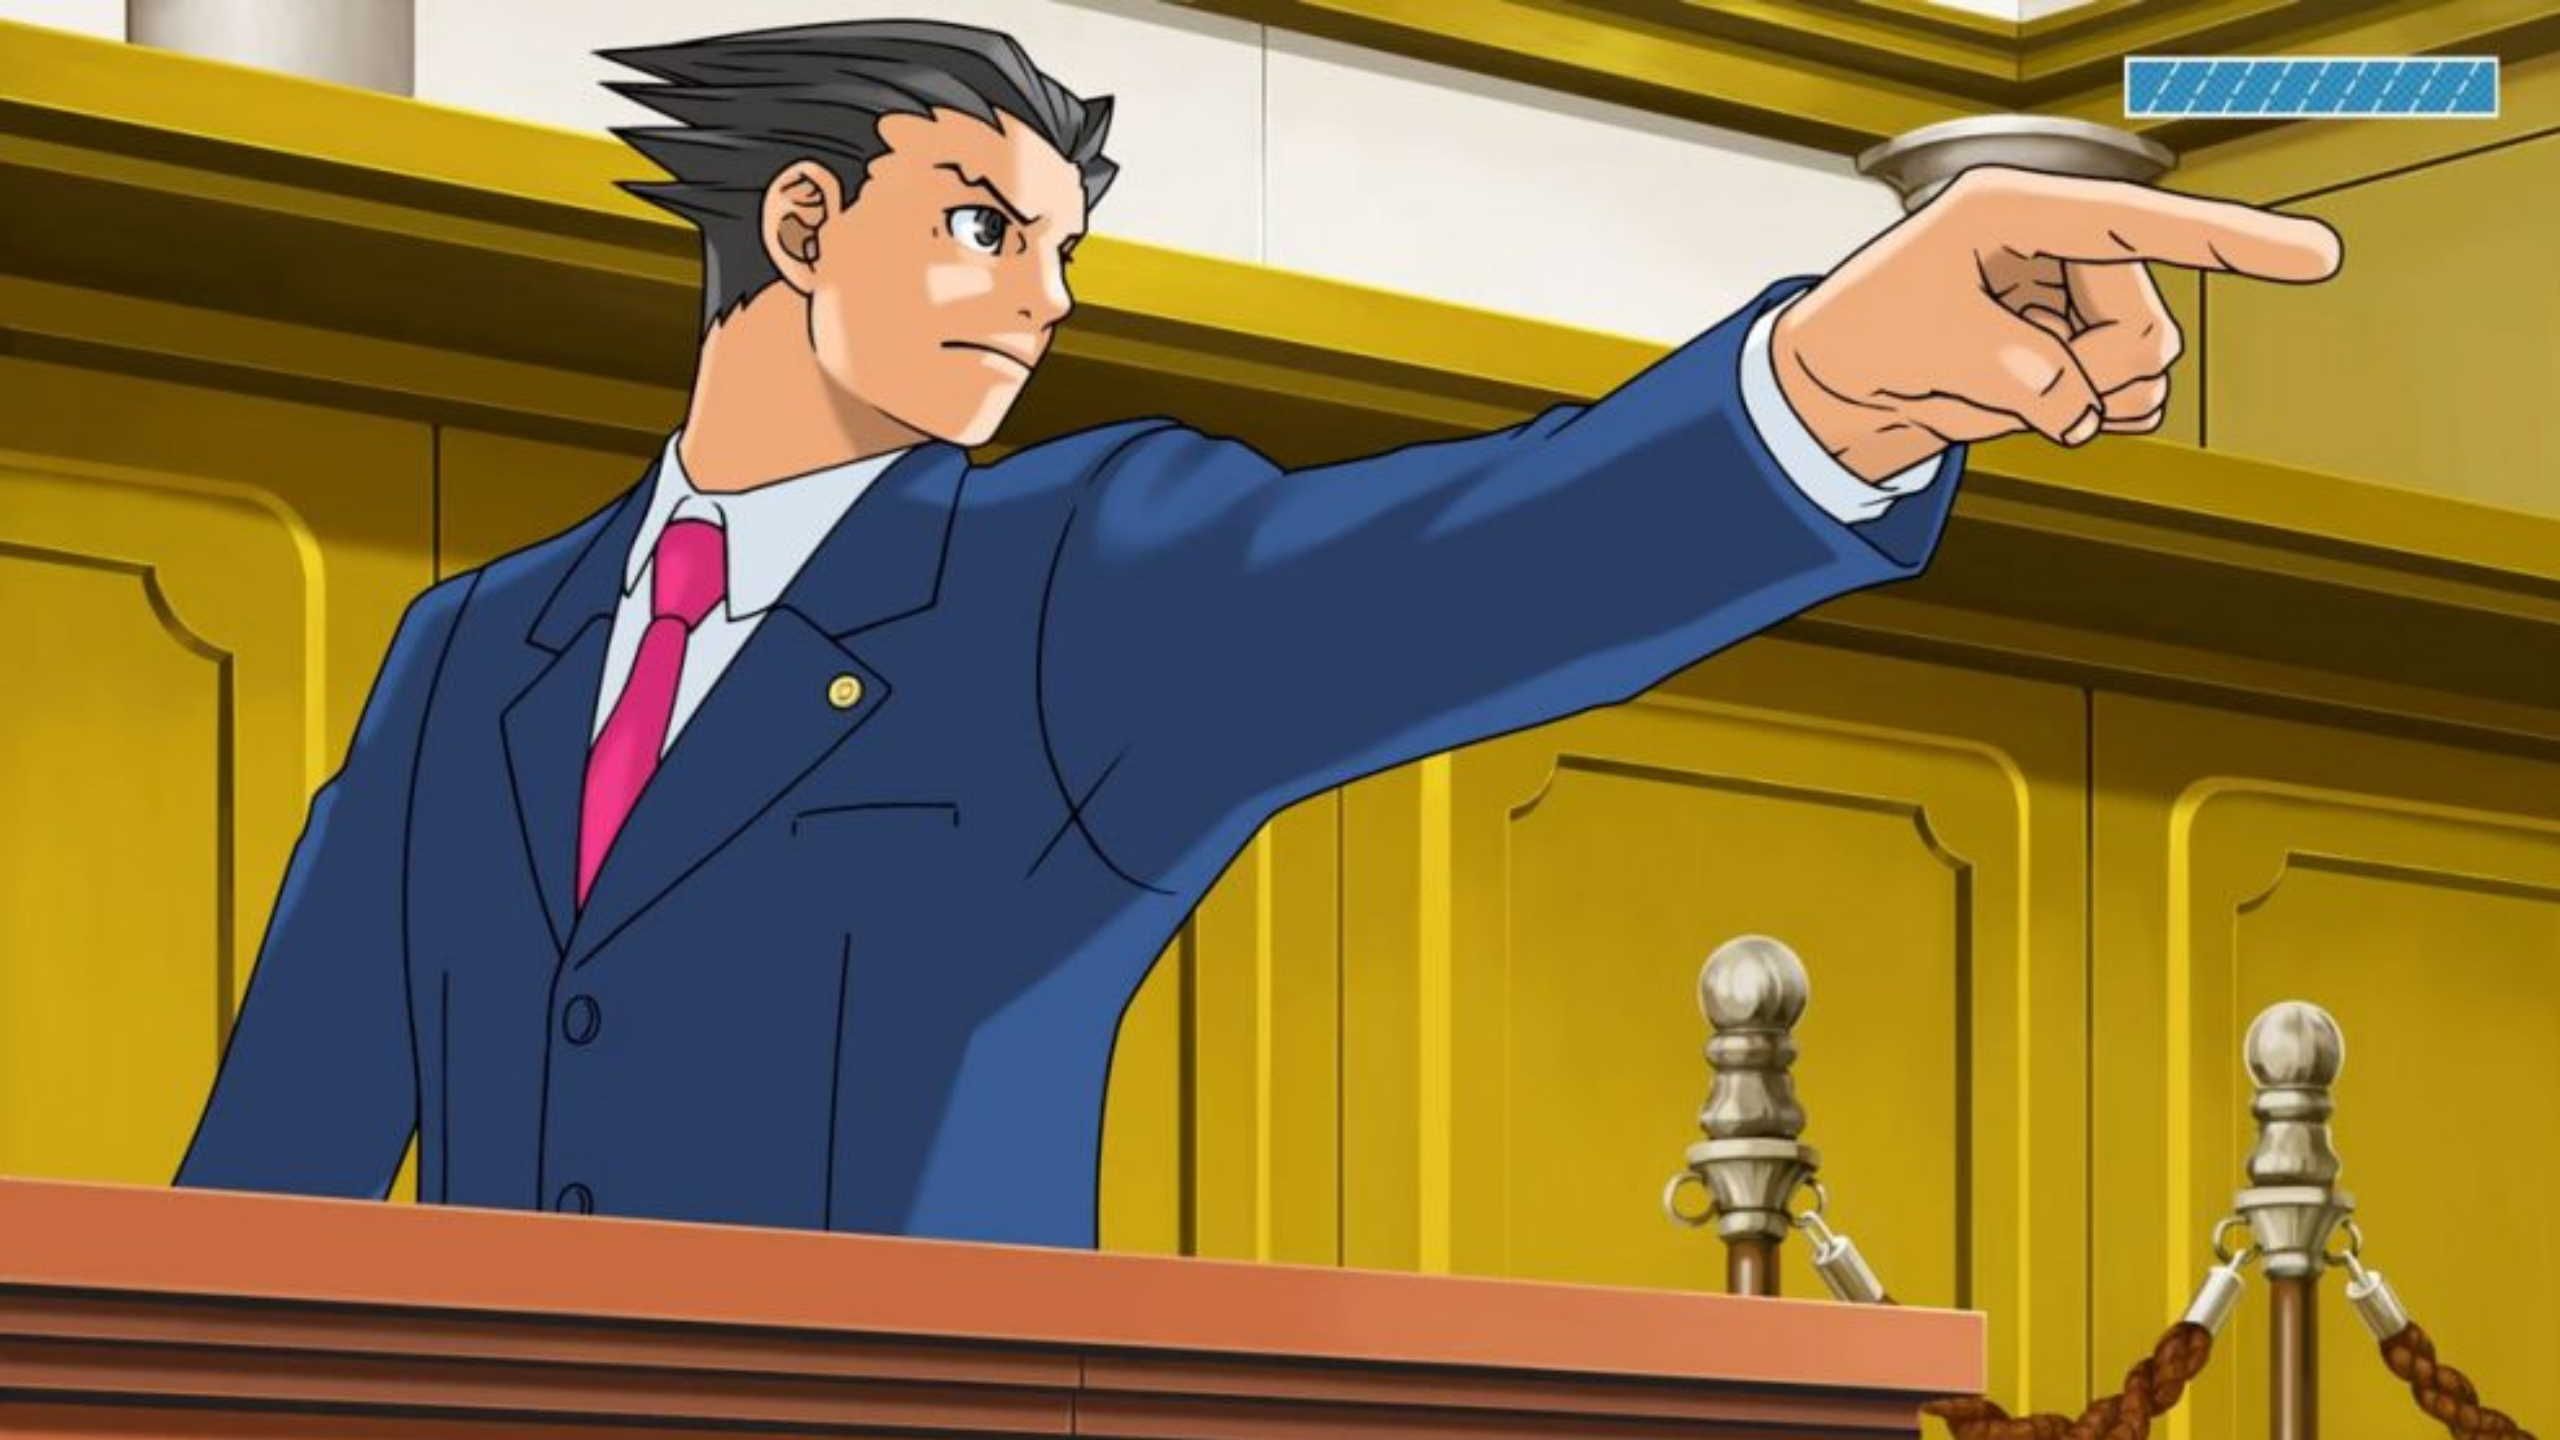 Phoenix Wright Ace Attorney Objection Court Gameplay